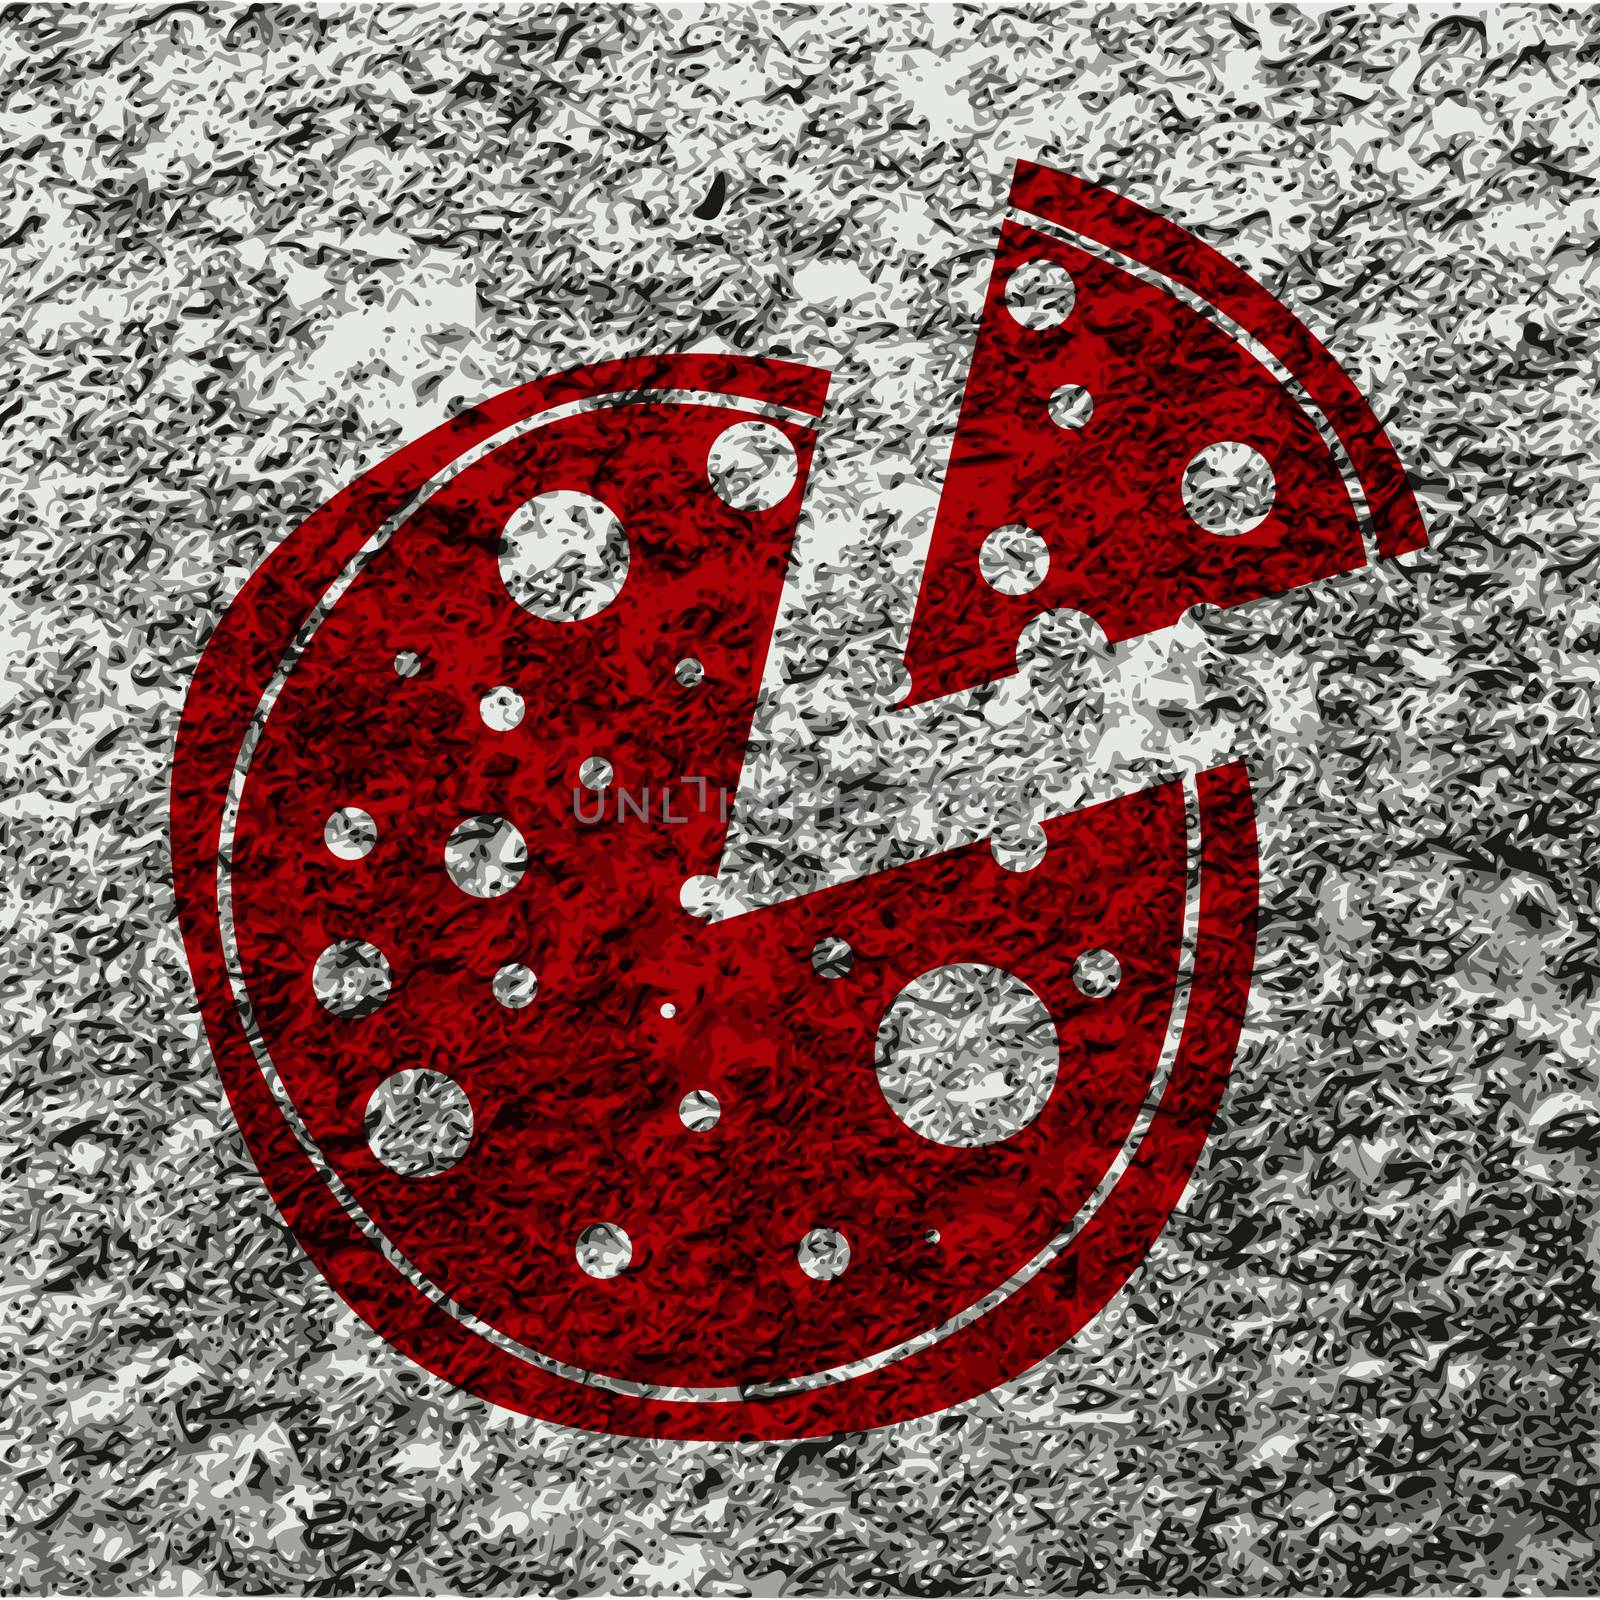 Pizza icon flat design with abstract background.